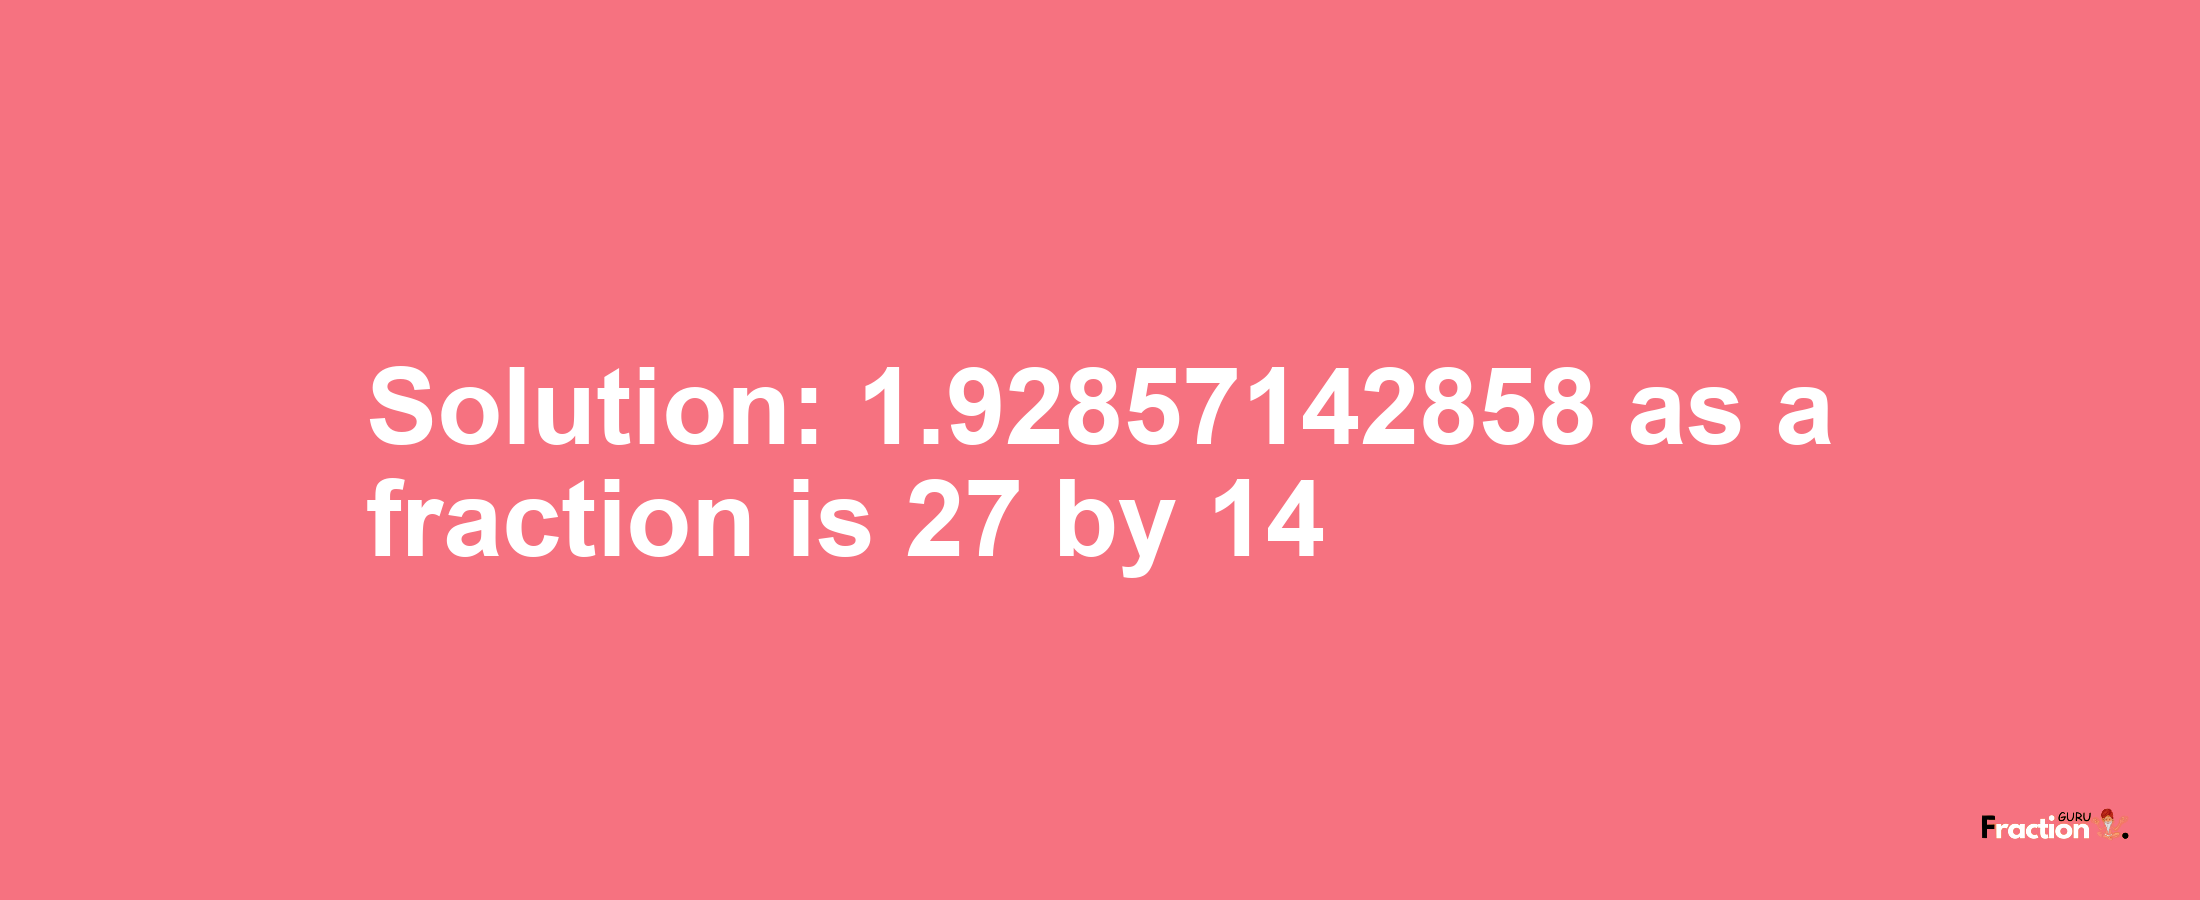 Solution:1.92857142858 as a fraction is 27/14